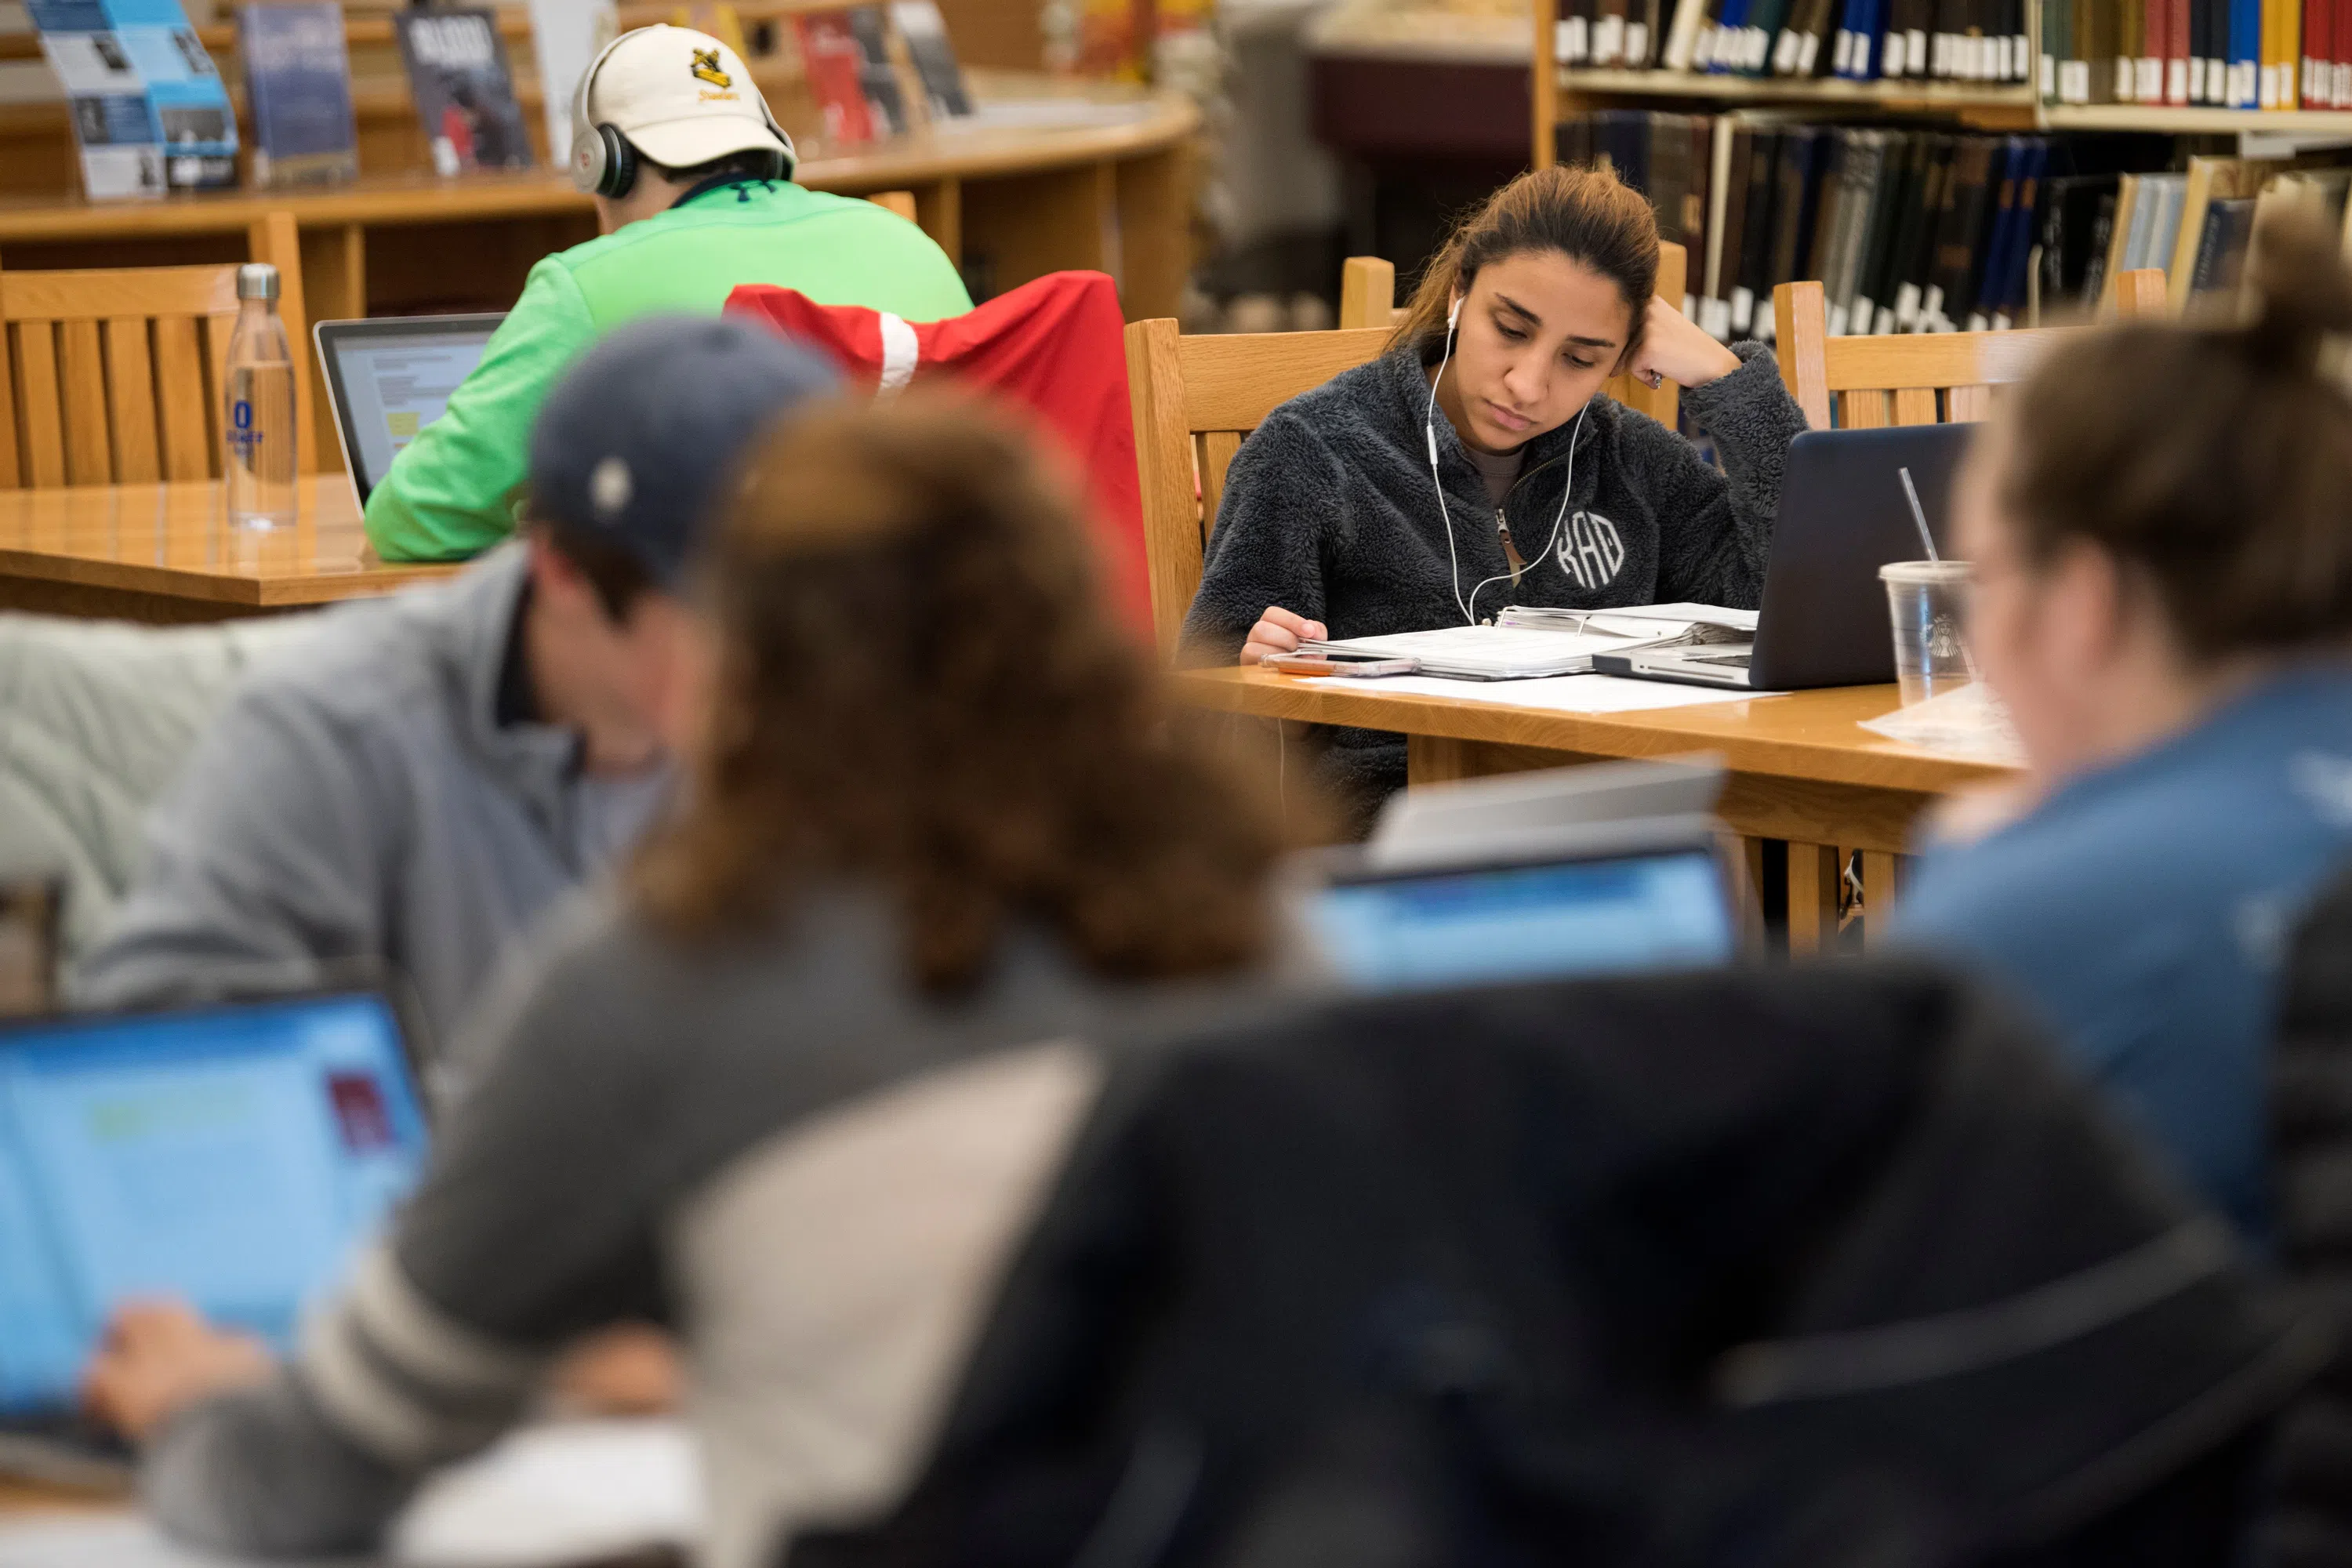 Several groups of students study in the library at several tables